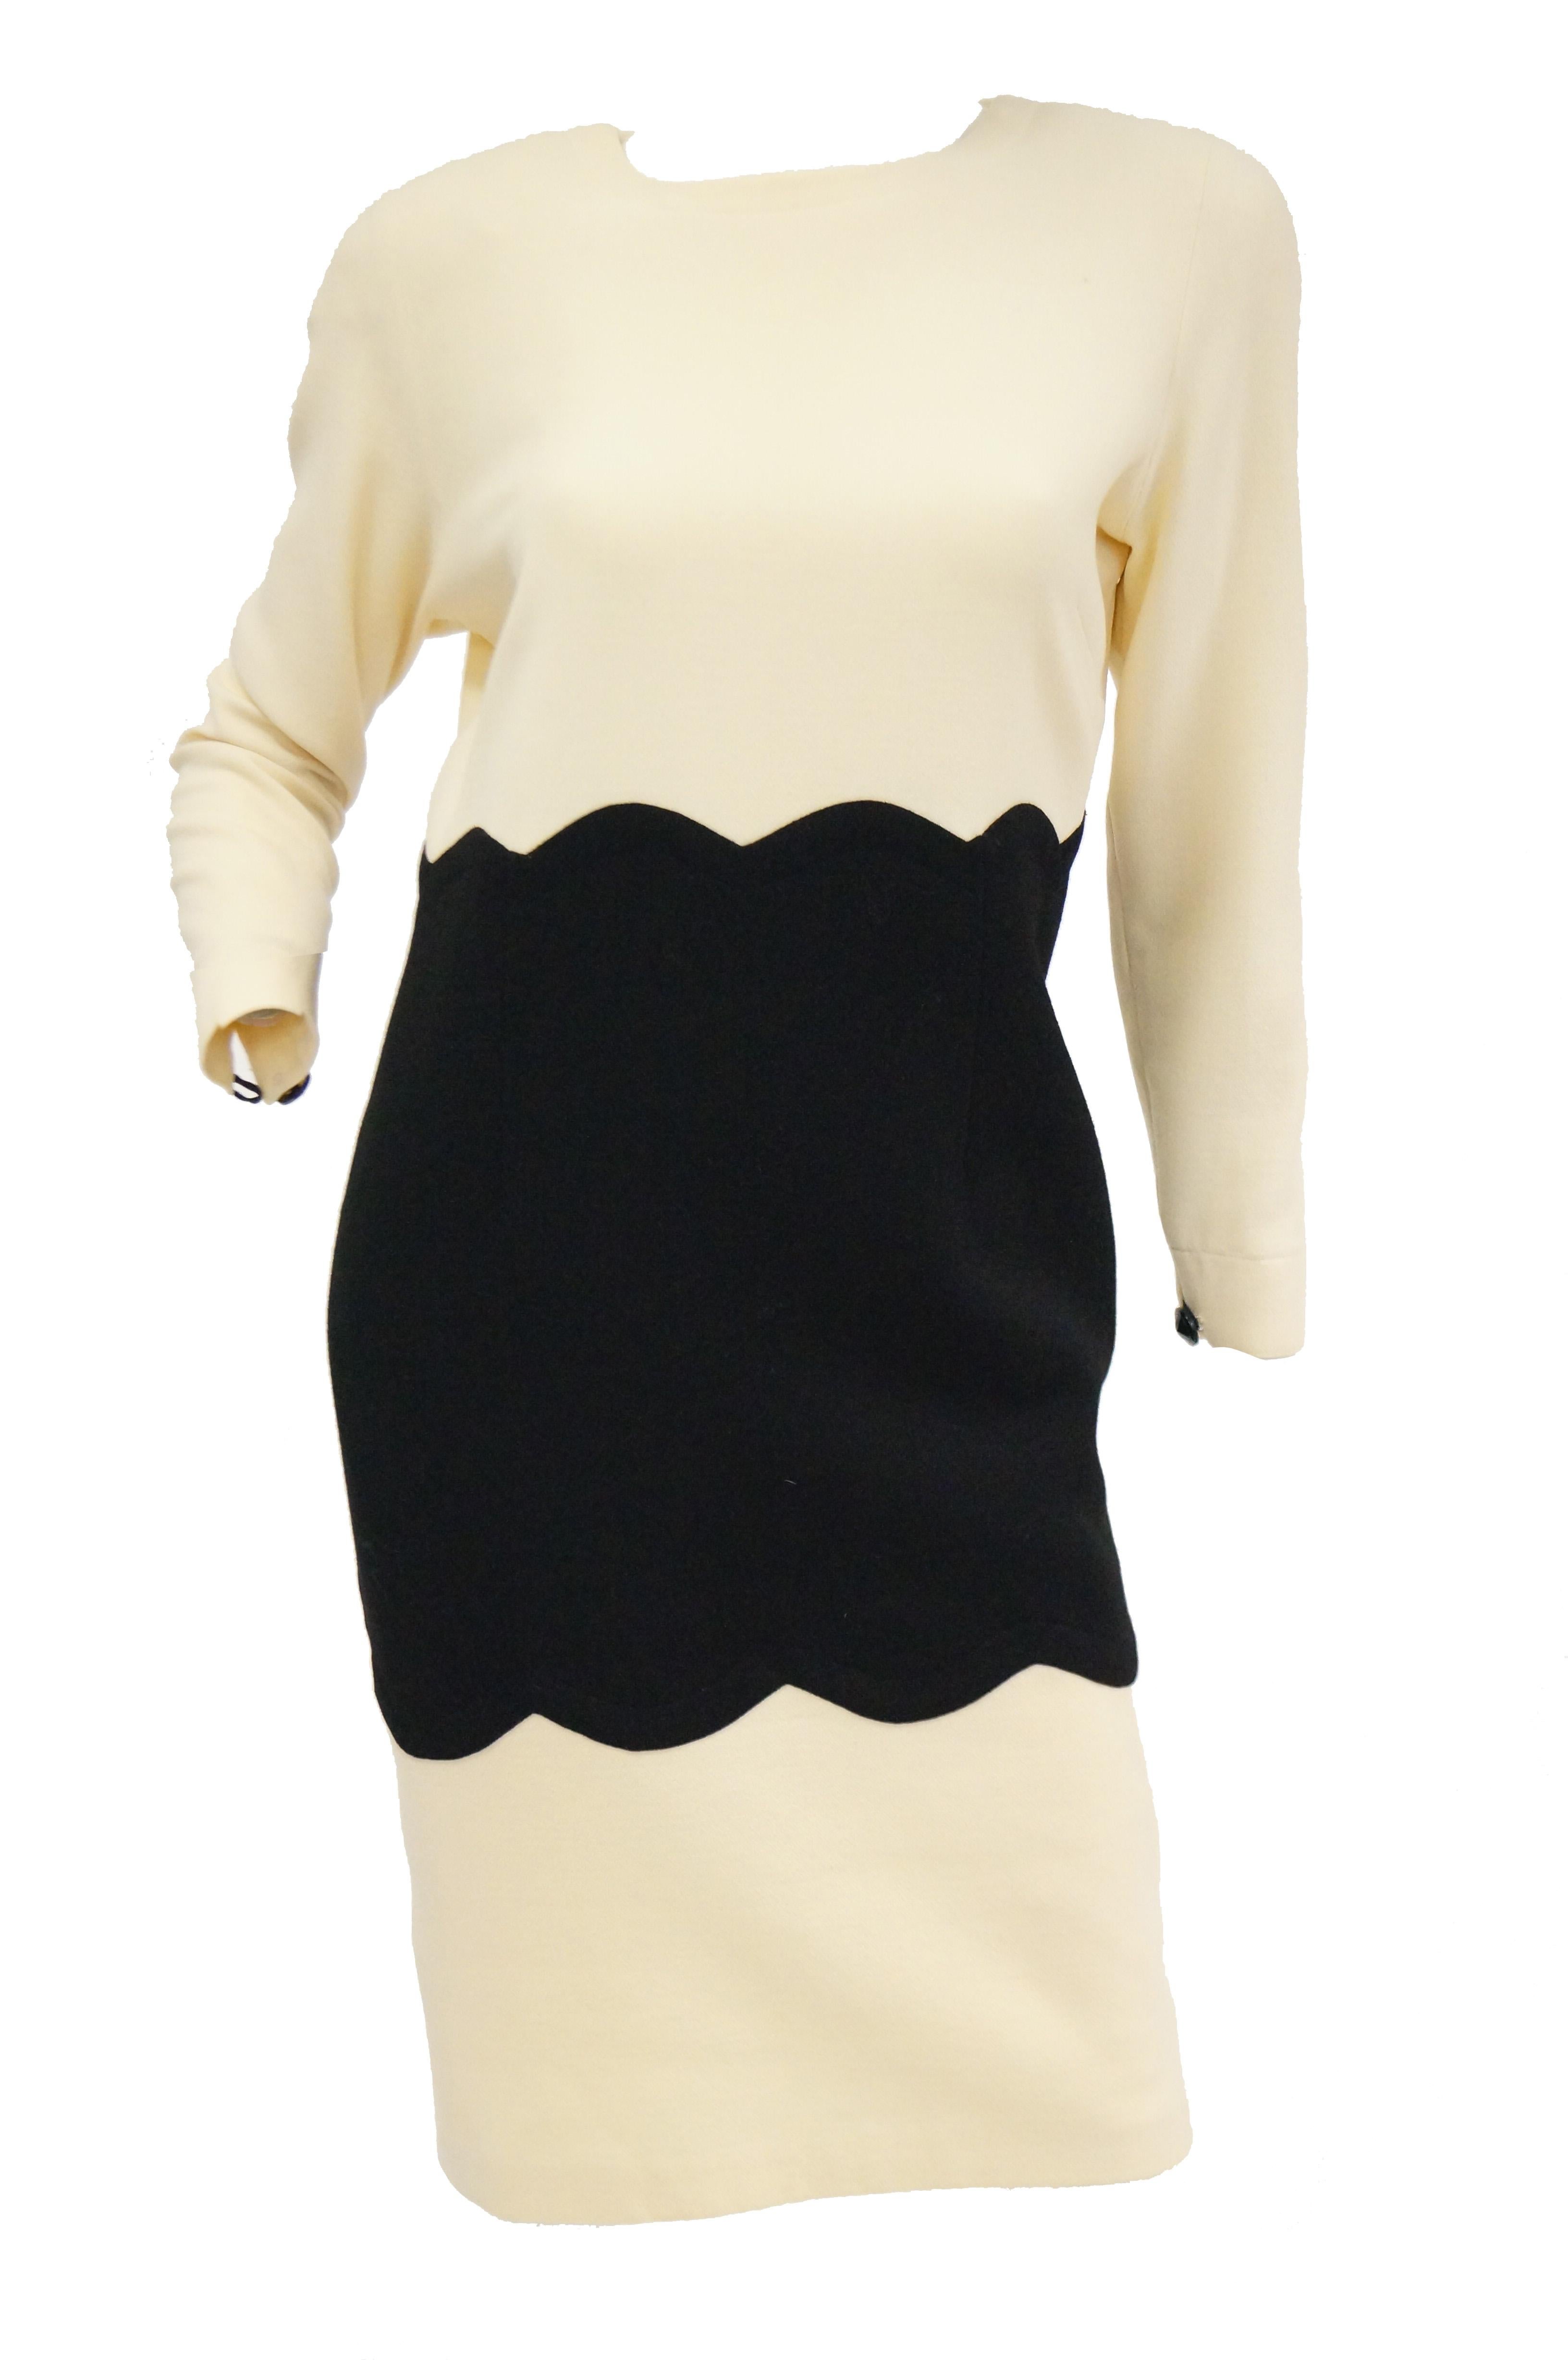 Elegant yet playful cream and black color blocked dress suit set by Amen Wardy. The ensemble is composed of a long sleeve knee - length dress, and a long sleeve, hip - length blazer. The dress has a wide jewel neckline, structured shoulders, and